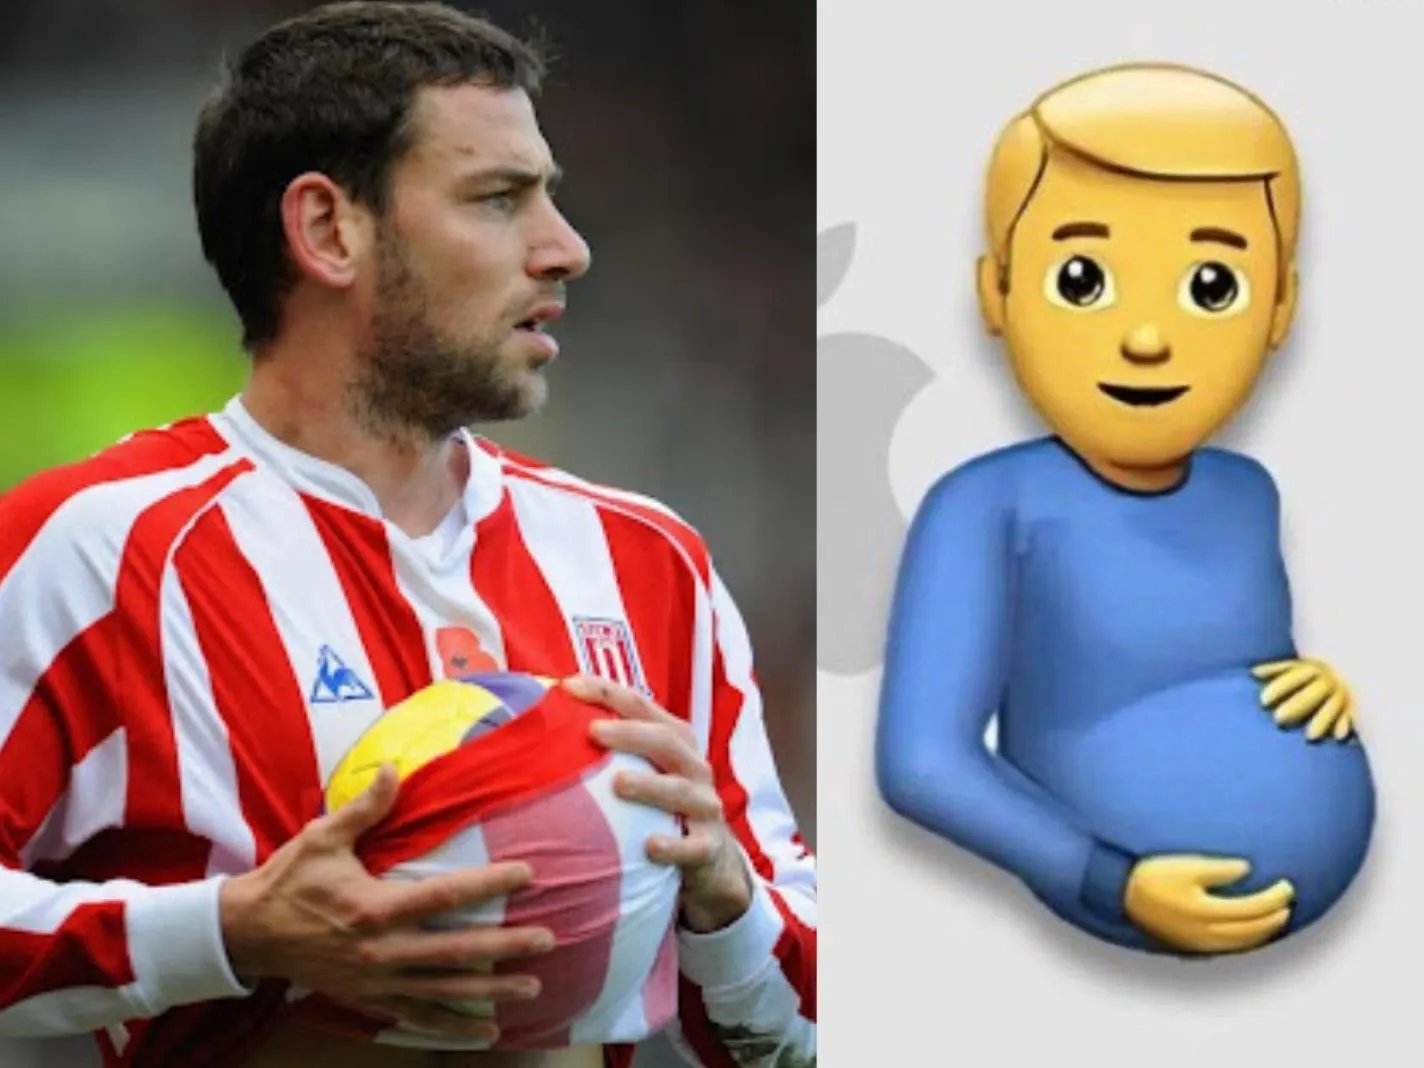 The pregnant man emoji from Apple that has got Rory Delap's throwing skill back in the limelight